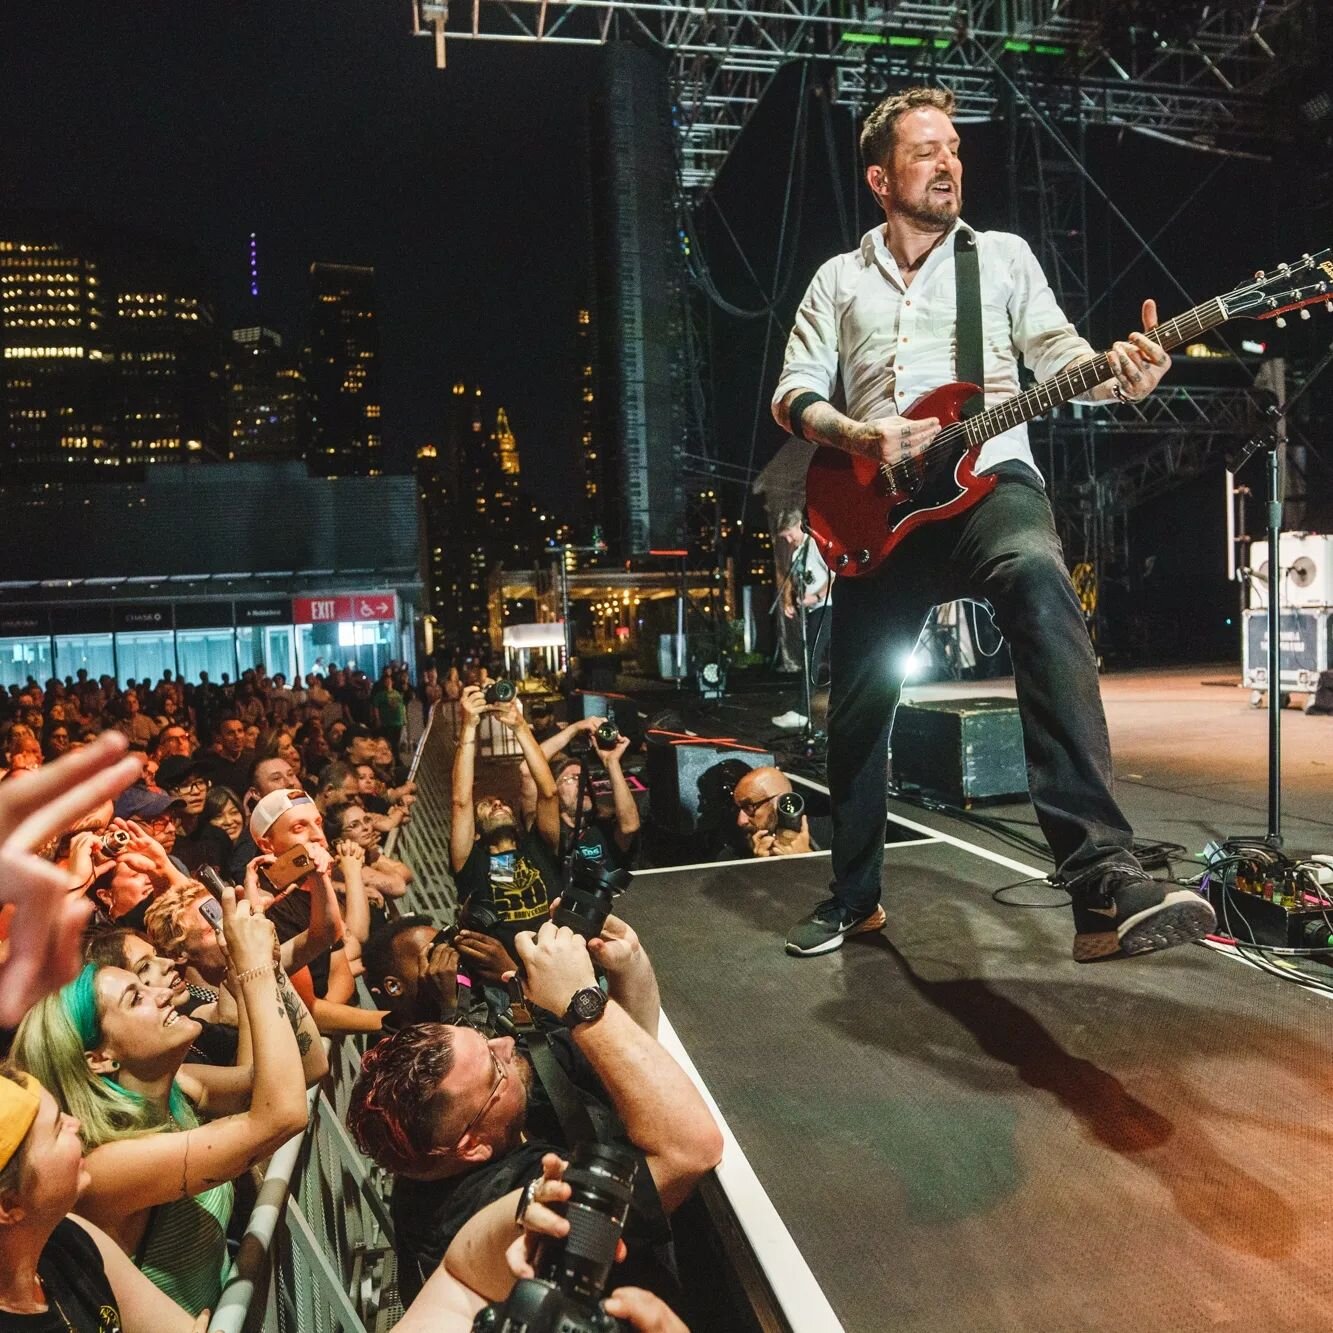 What an electrifying night under the stars at Pier 17 Rooftop Concert Venue in Manhattan! 🌃🎶✨ Co-headliners&nbsp;@FrankTurner&nbsp;and&nbsp;@theinterrupters&nbsp;set the stage ablaze with their exhilarating performances, leaving the crowd in awe an